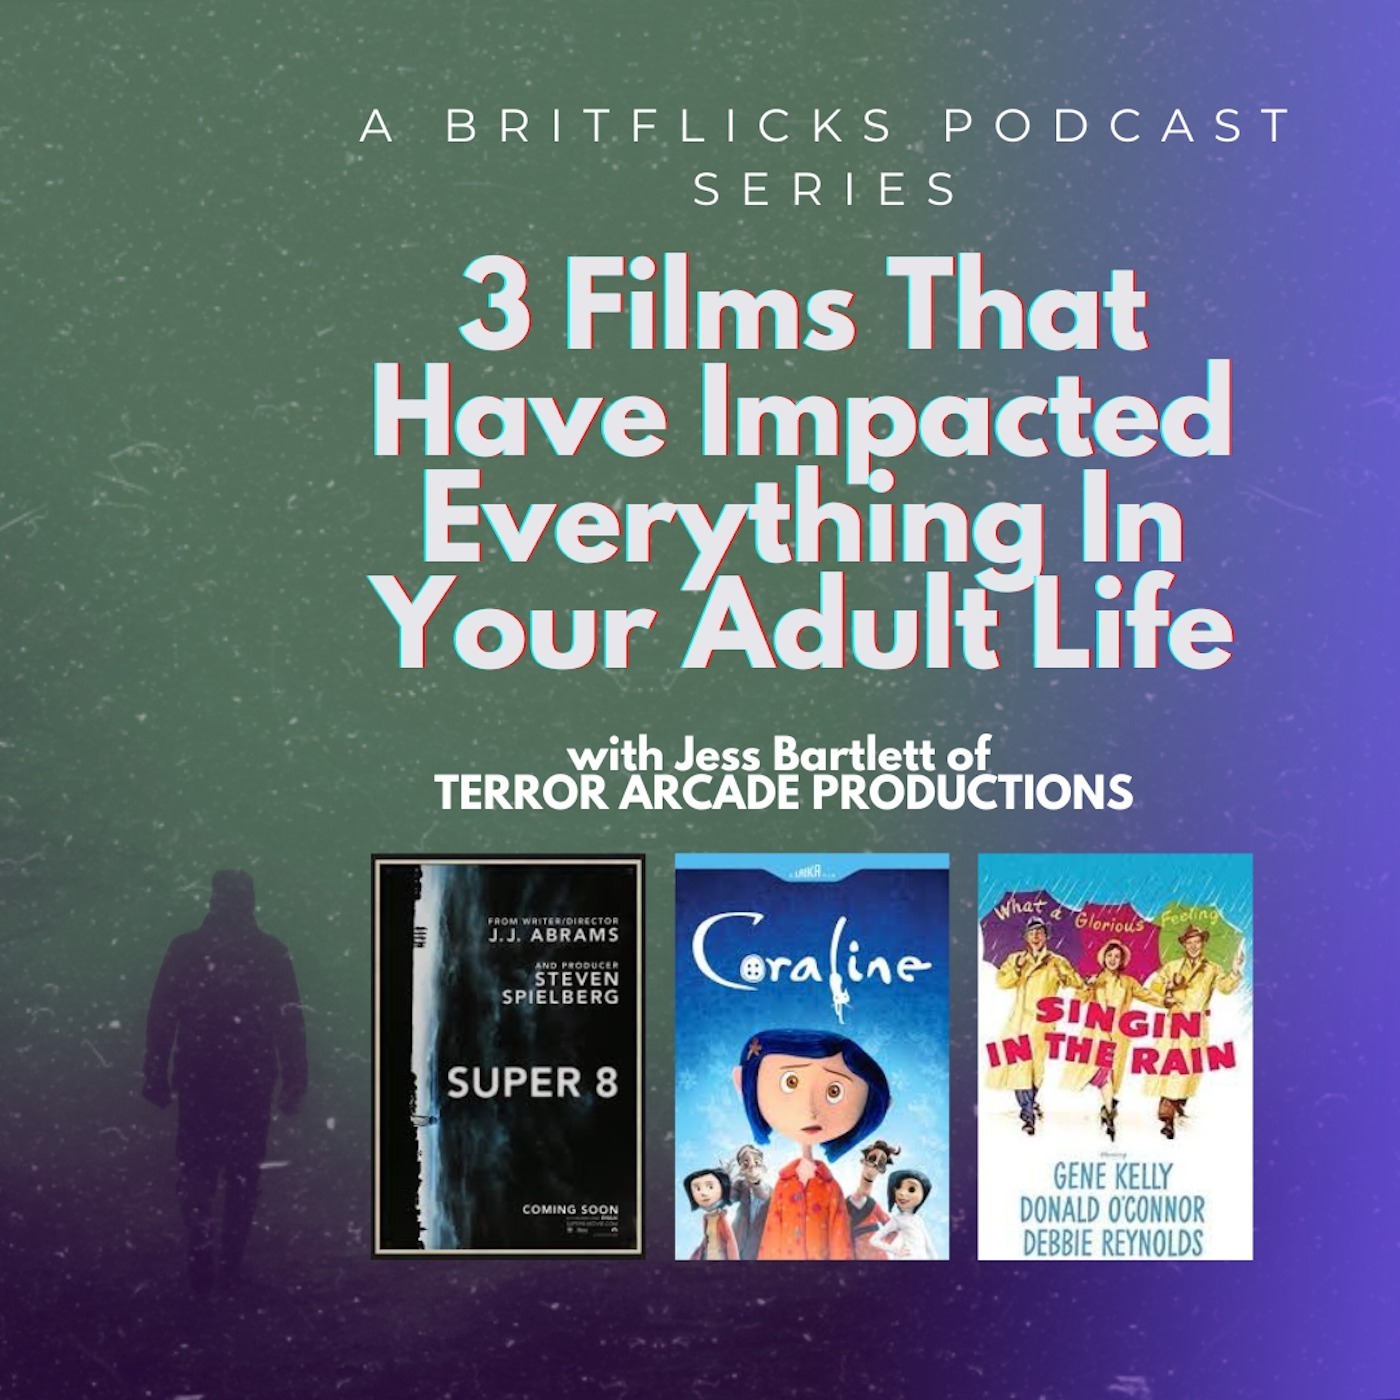 3 Films That Have Impacted Everything In Your Adult Life with filmmaker Jess Bartlett of TERROR ARCADE PRODUCTIONS